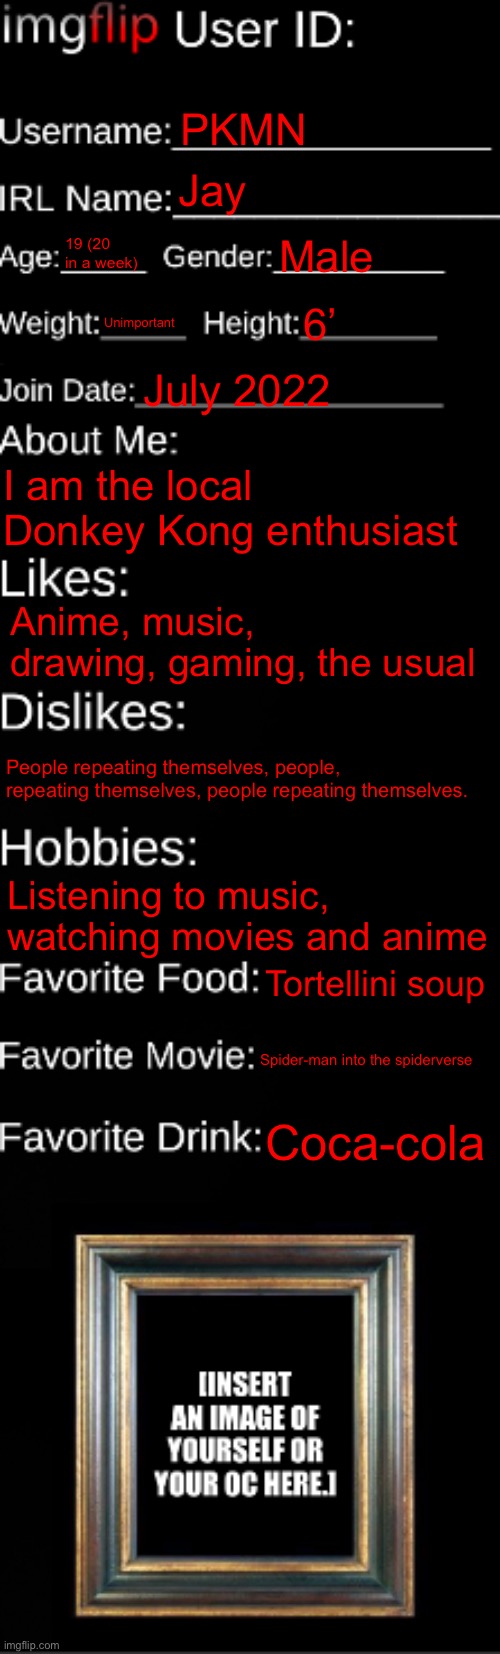 imgflip ID Card | PKMN; Jay; 19 (20 in a week); Male; Unimportant; 6’; July 2022; I am the local Donkey Kong enthusiast; Anime, music, drawing, gaming, the usual; People repeating themselves, people, repeating themselves, people repeating themselves. Listening to music, watching movies and anime; Tortellini soup; Spider-man into the spiderverse; Coca-cola | image tagged in imgflip id card | made w/ Imgflip meme maker